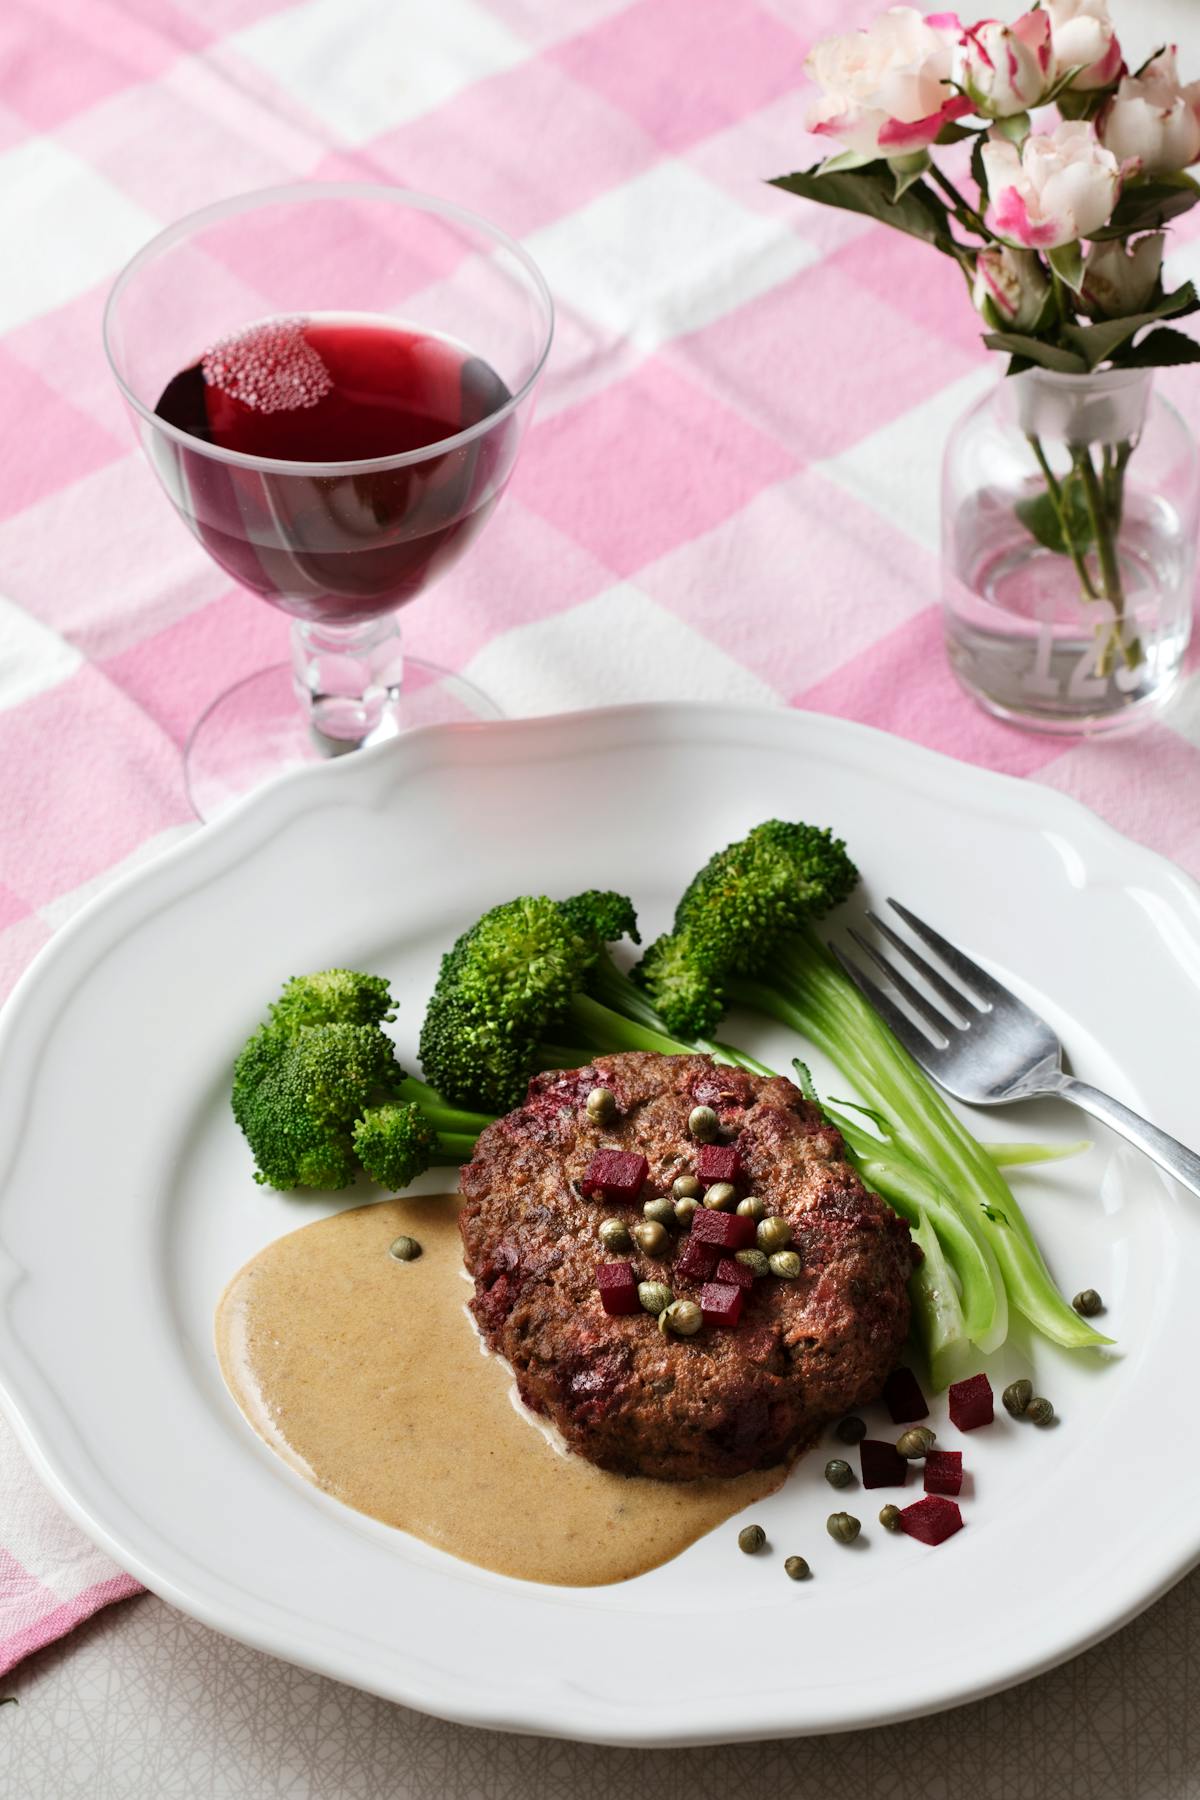 Beef burgers with beets, cream sauce and broccoli